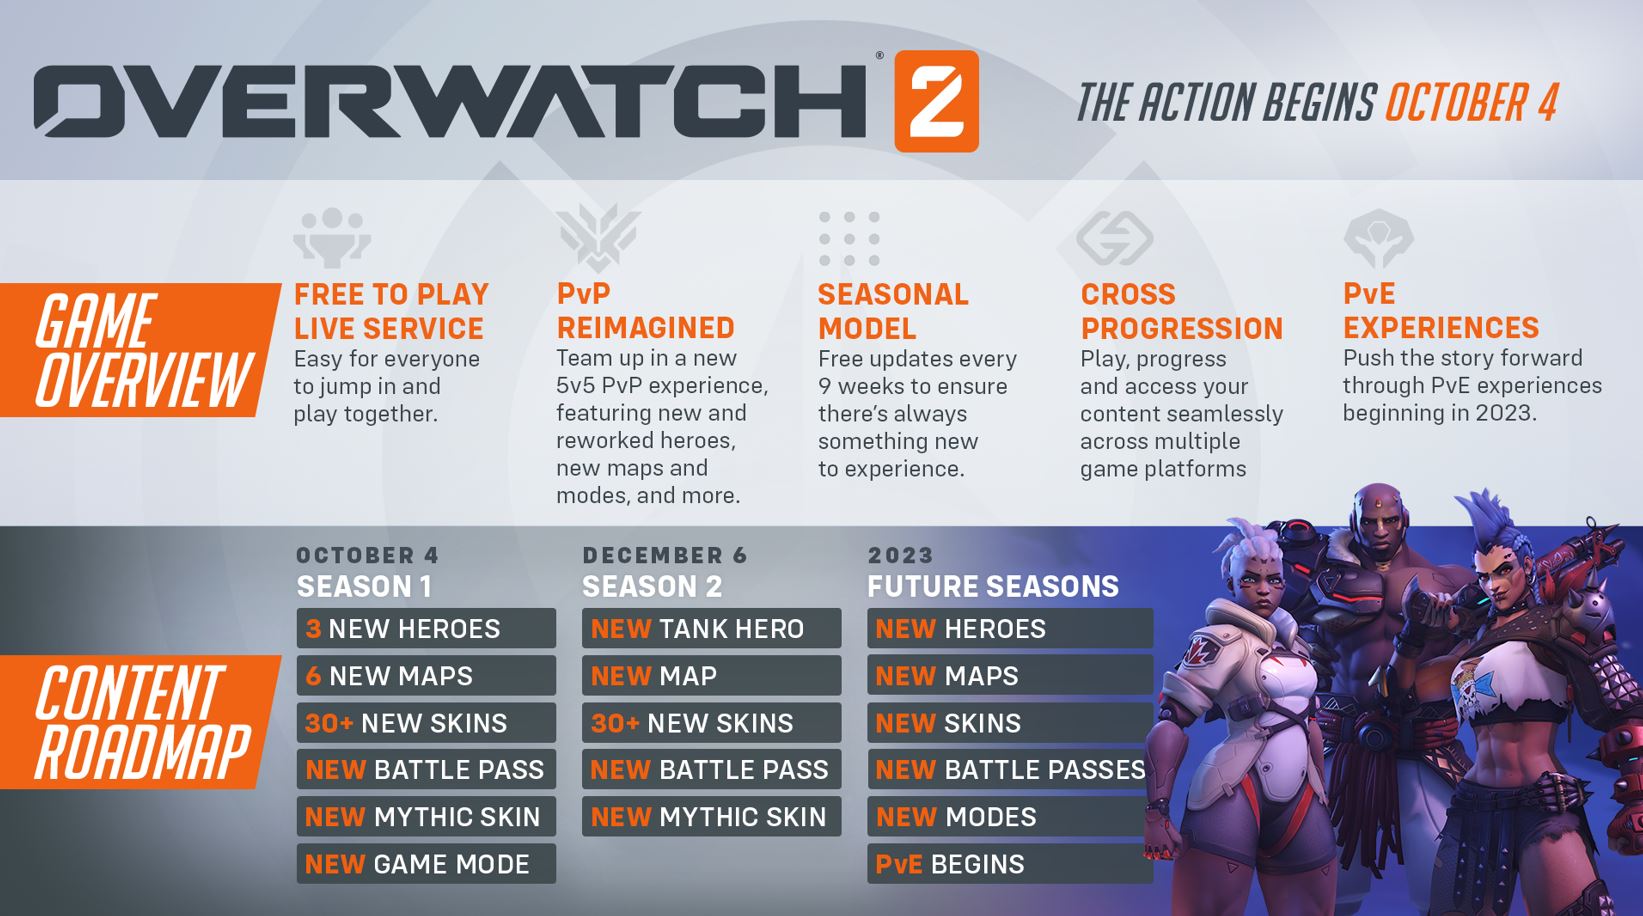 Why Overwatch isn't free-to-play